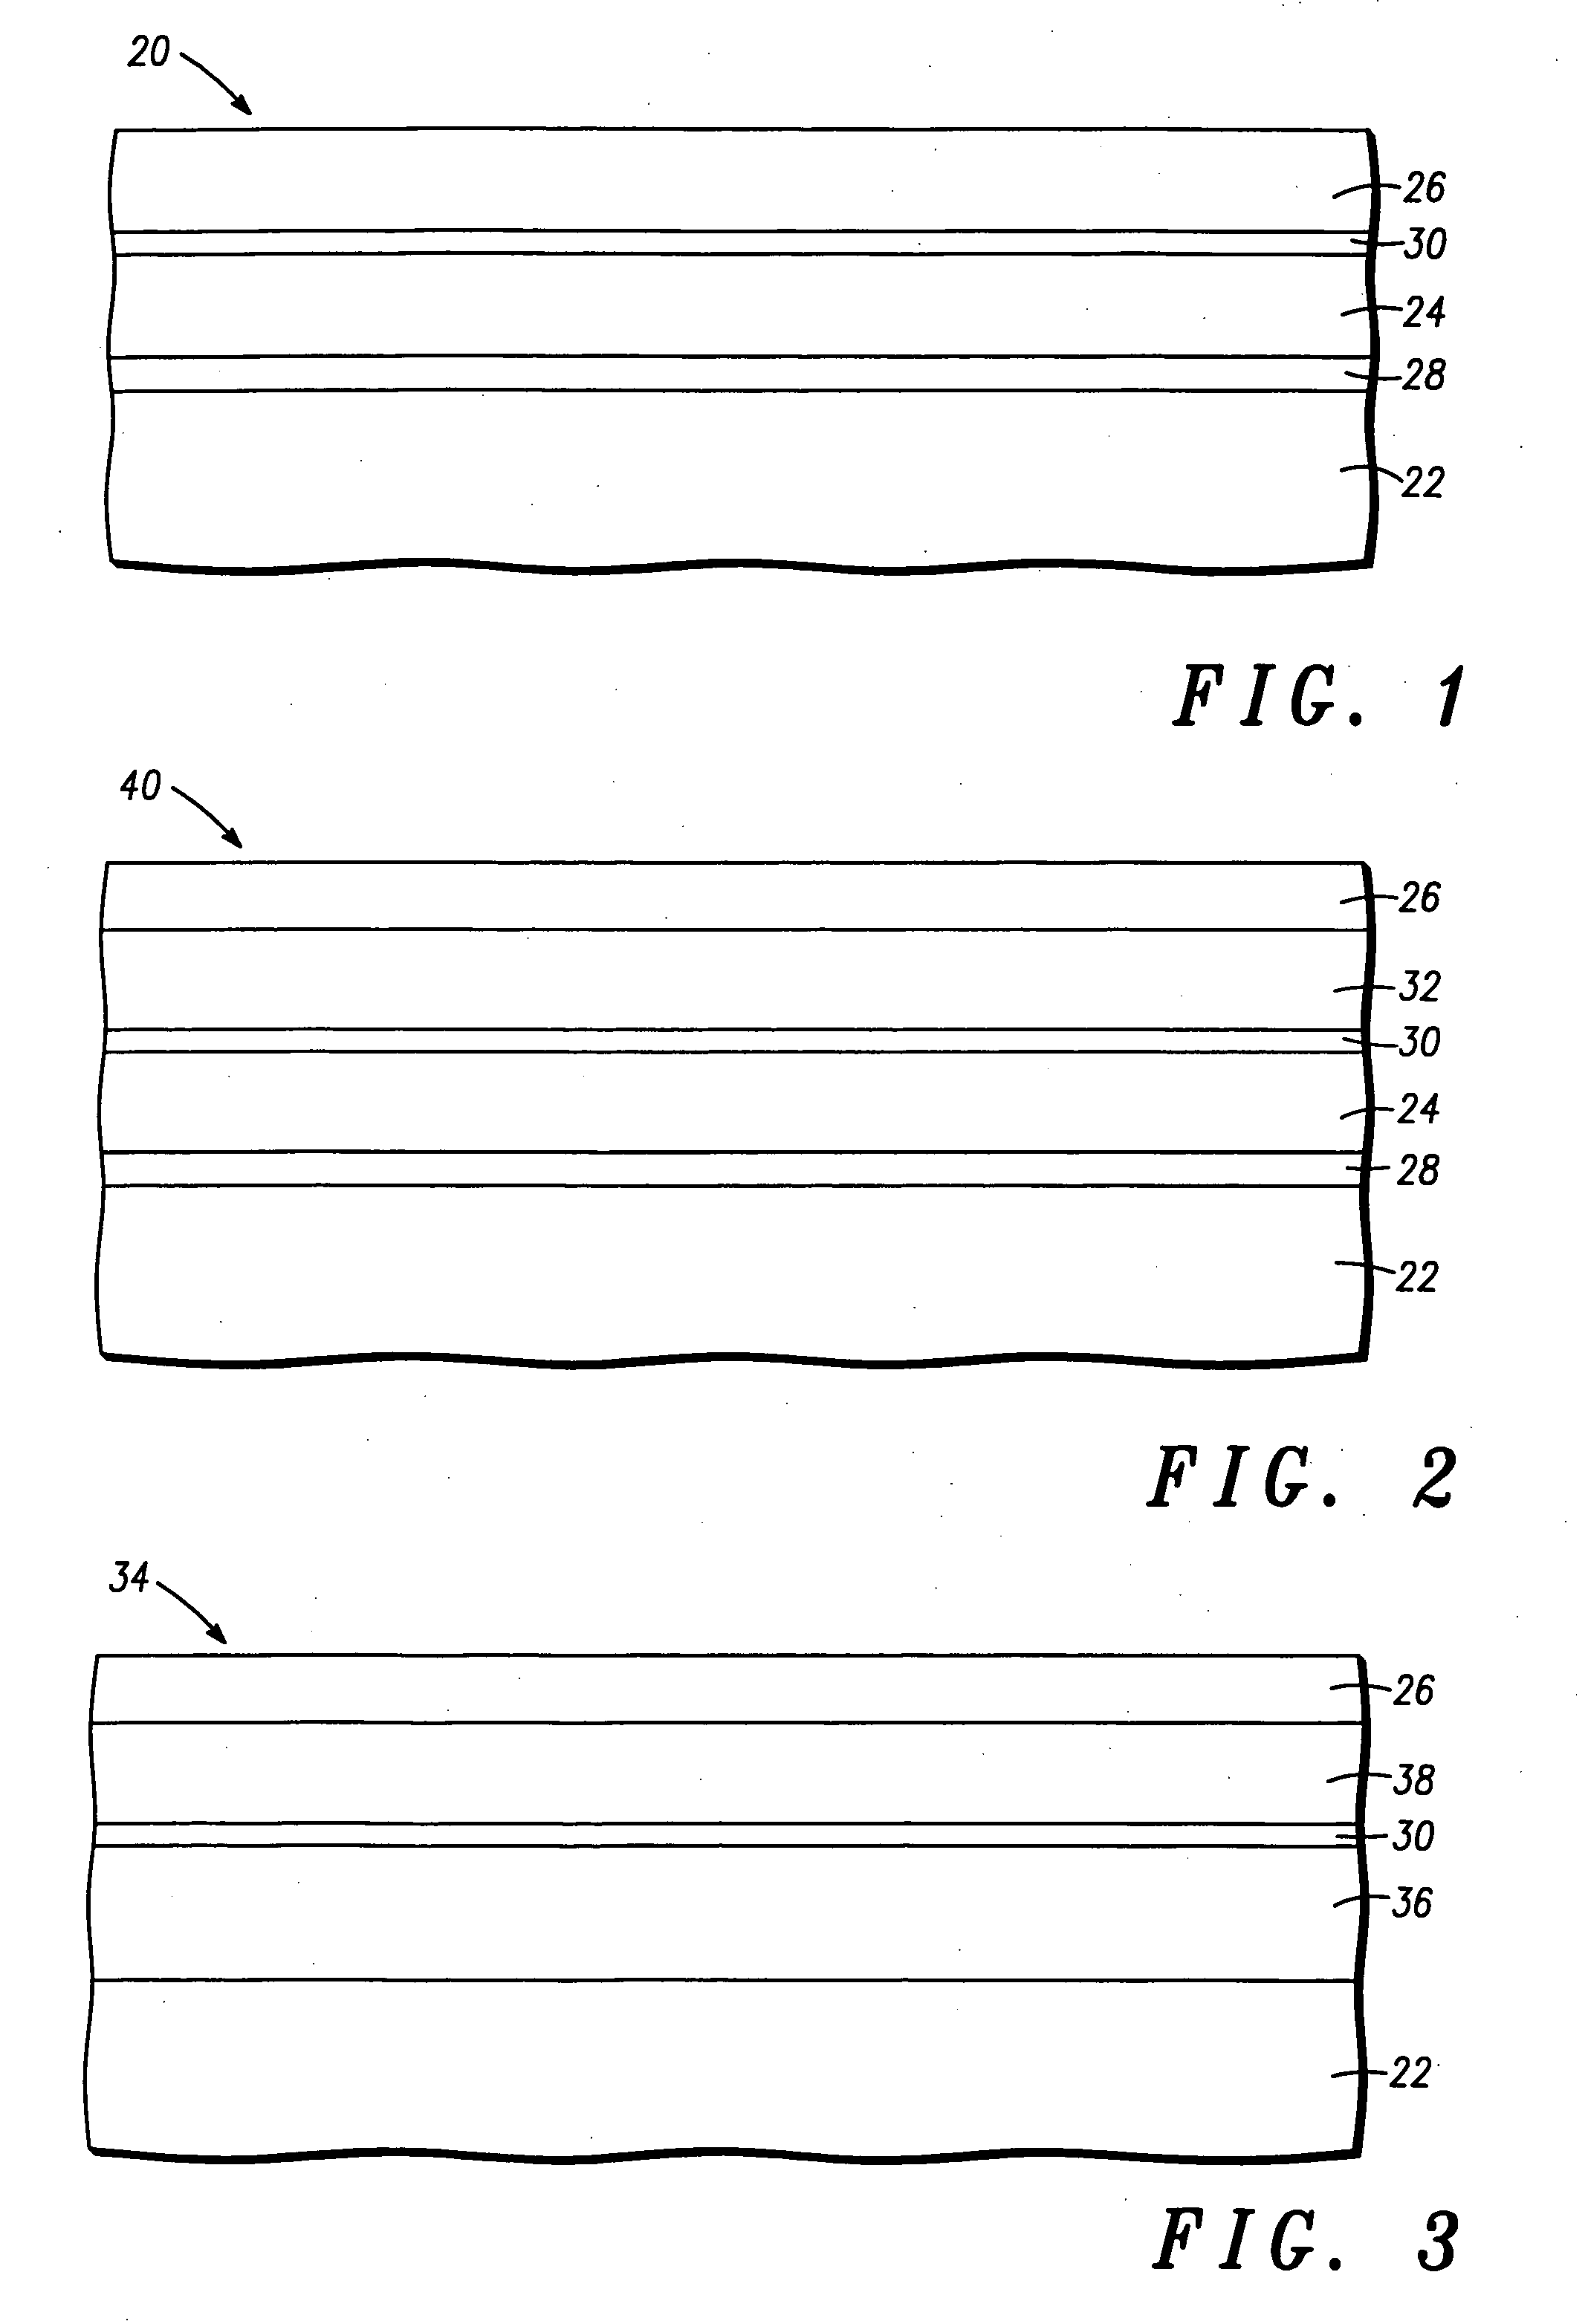 Structure and method for fabricating GaN devices utilizing the formation of a compliant substrate